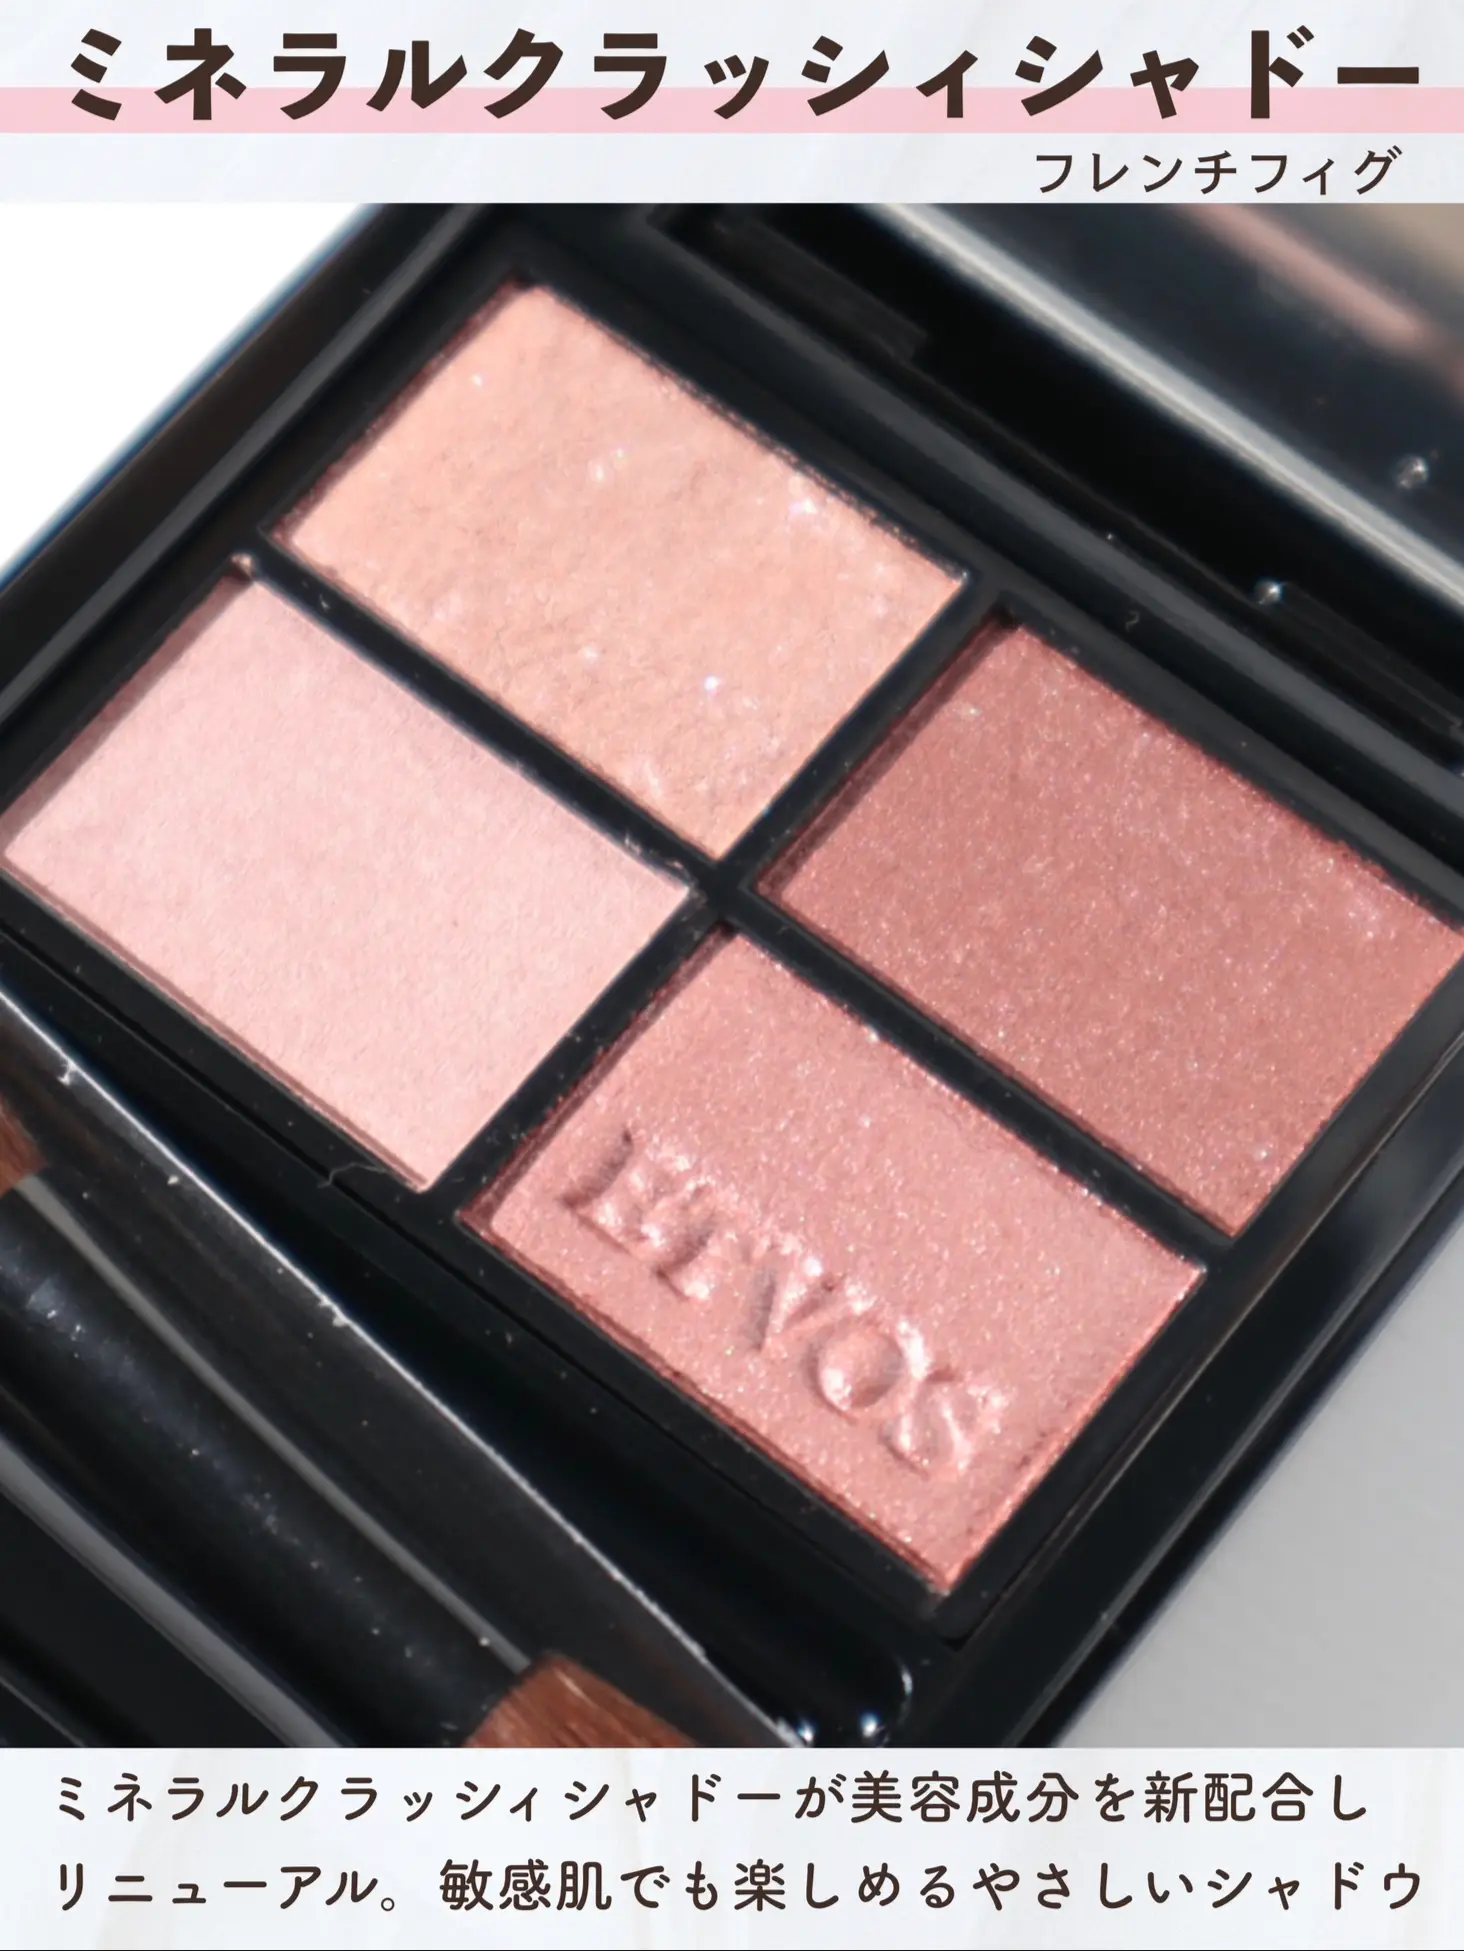 Can be used even with warm tone] ETVOS New Pink Shadow | Gallery